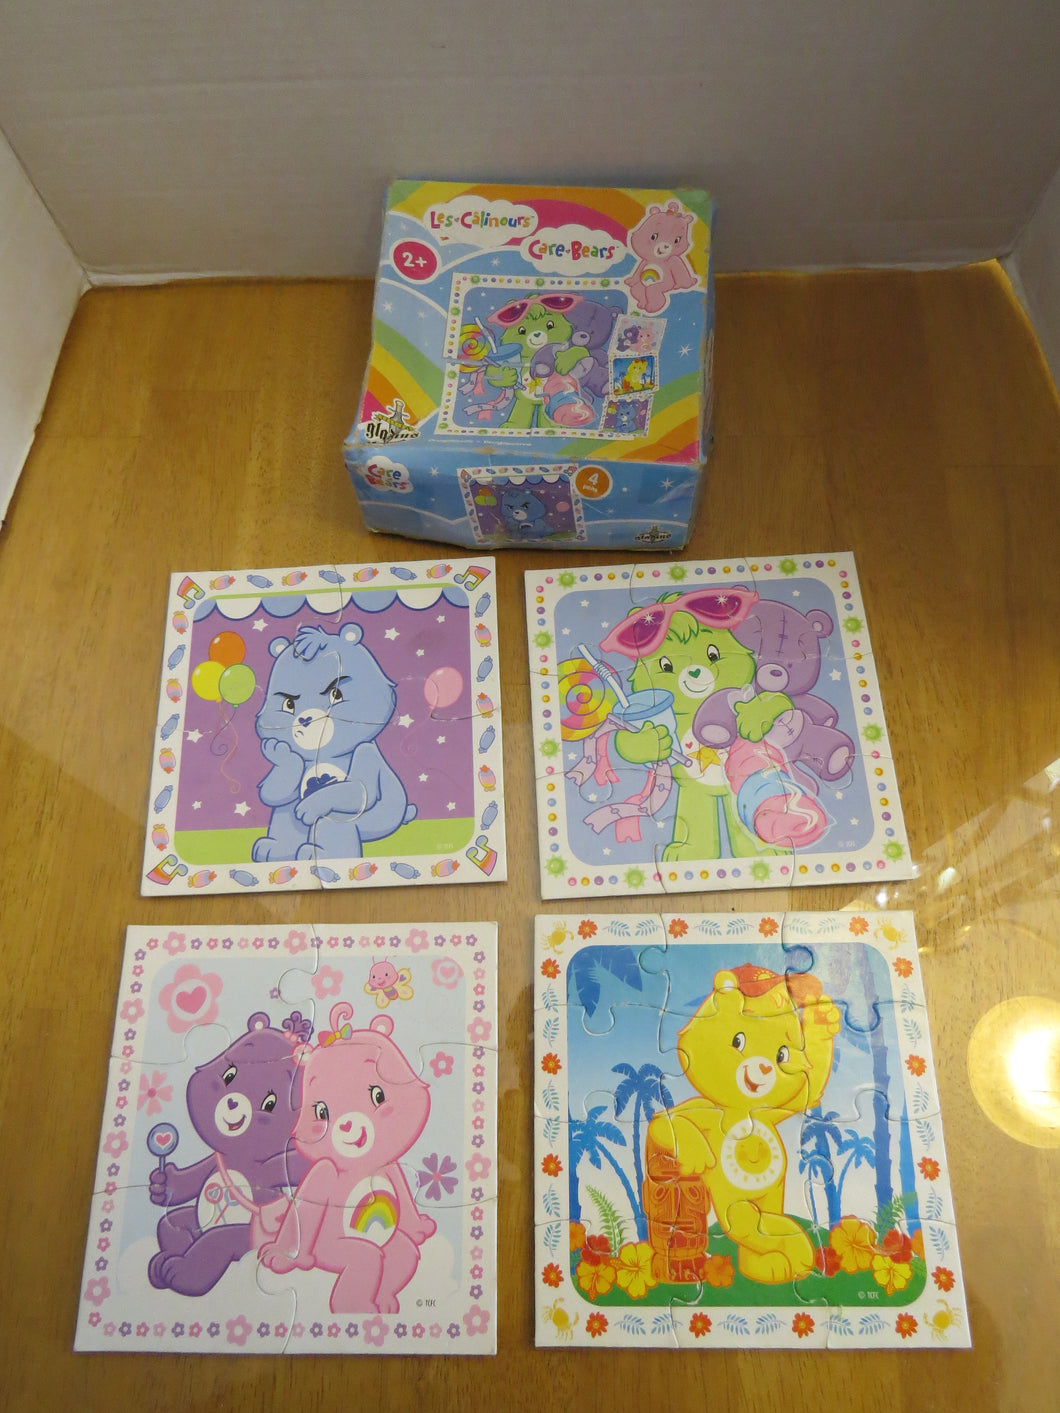 CAREBEARS - CARE BEARS - 4 IN ONE  - puzzle complete w box